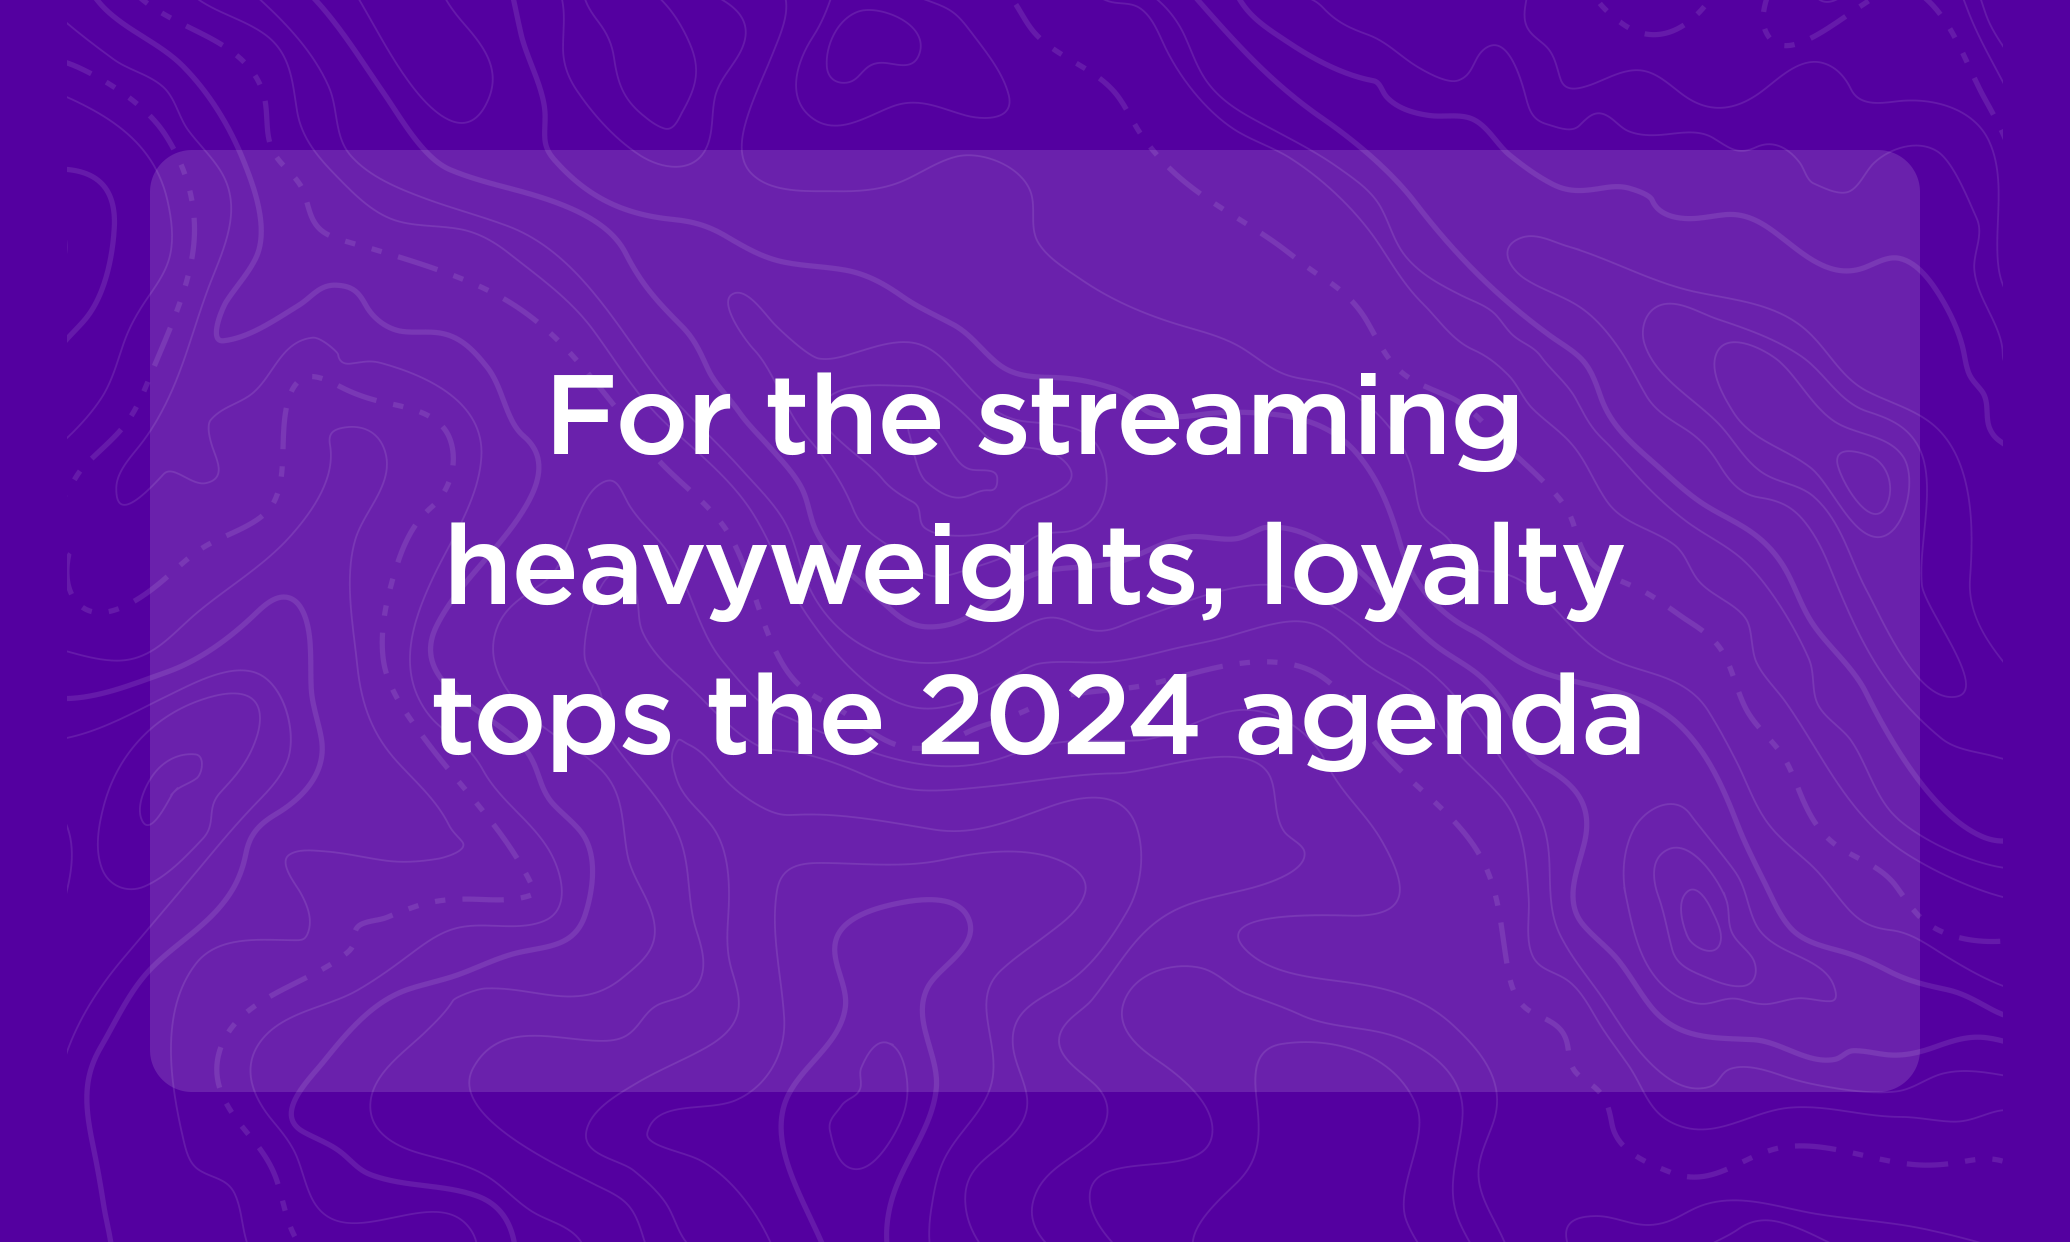 For the streaming heavyweights, loyalty tops the 2024 agenda